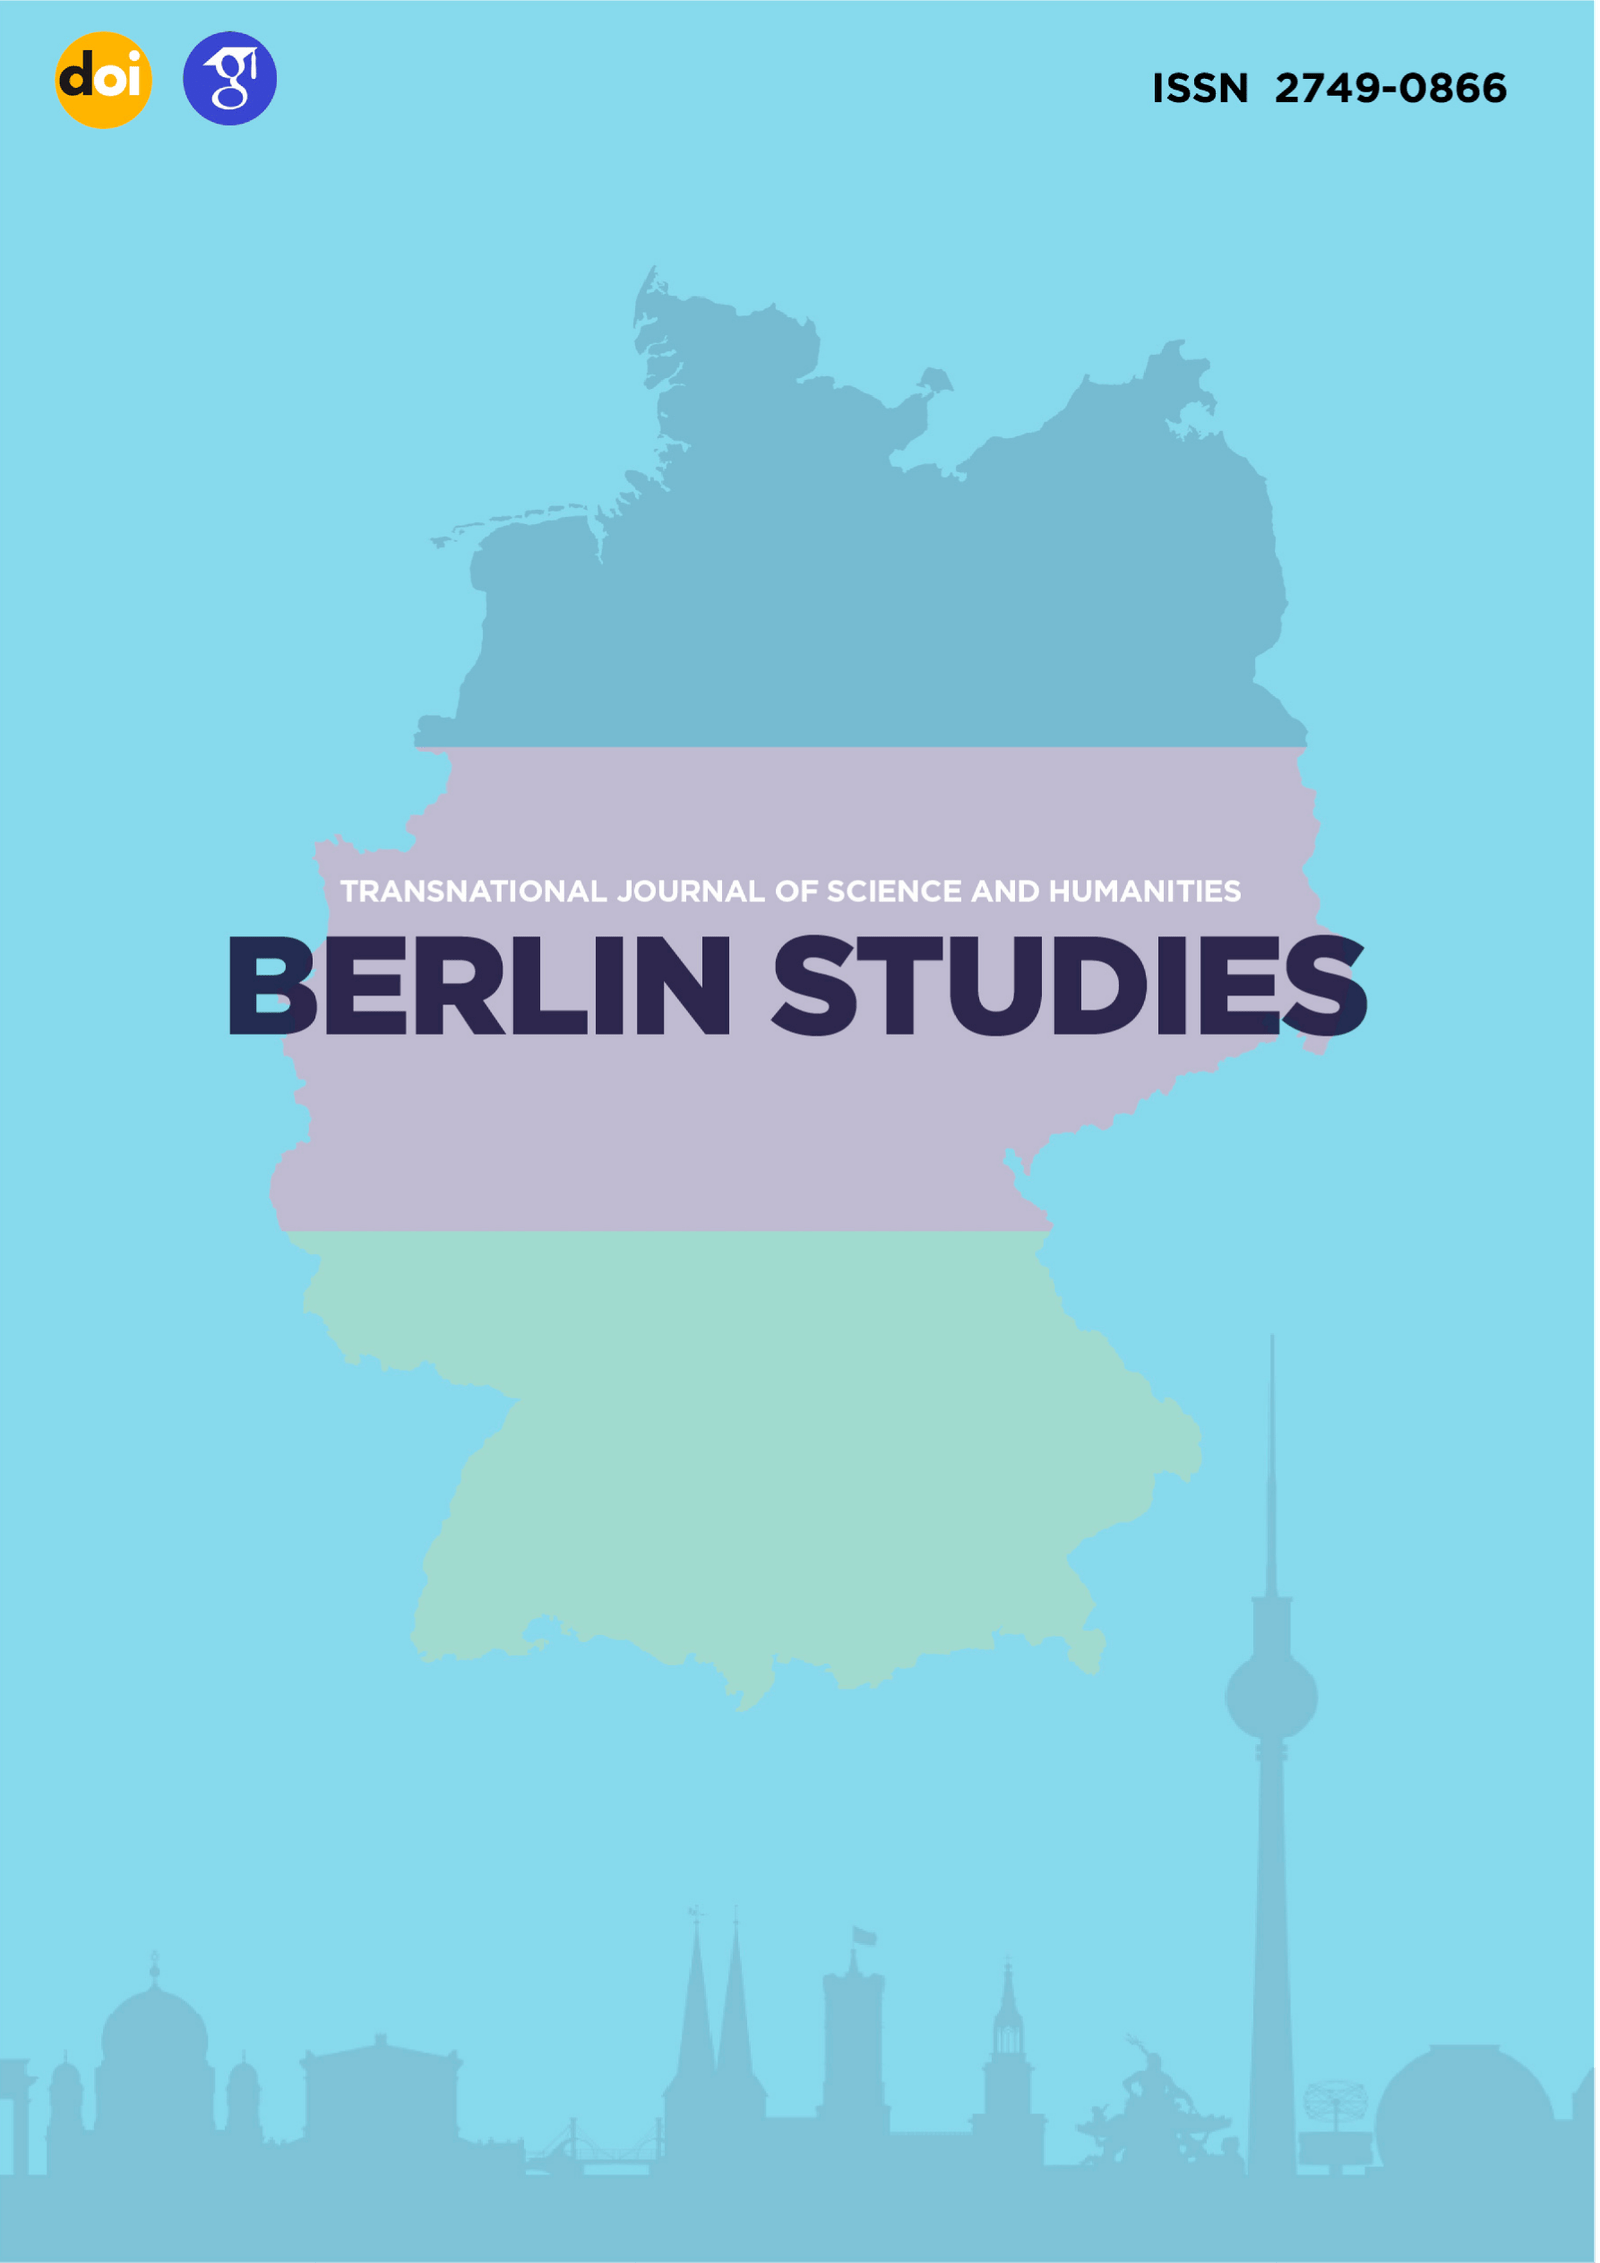 					View Vol. 1 No. 1.8 Political sciences (2021): Berlin Studies Transnational Journal of Science and Humanities
				